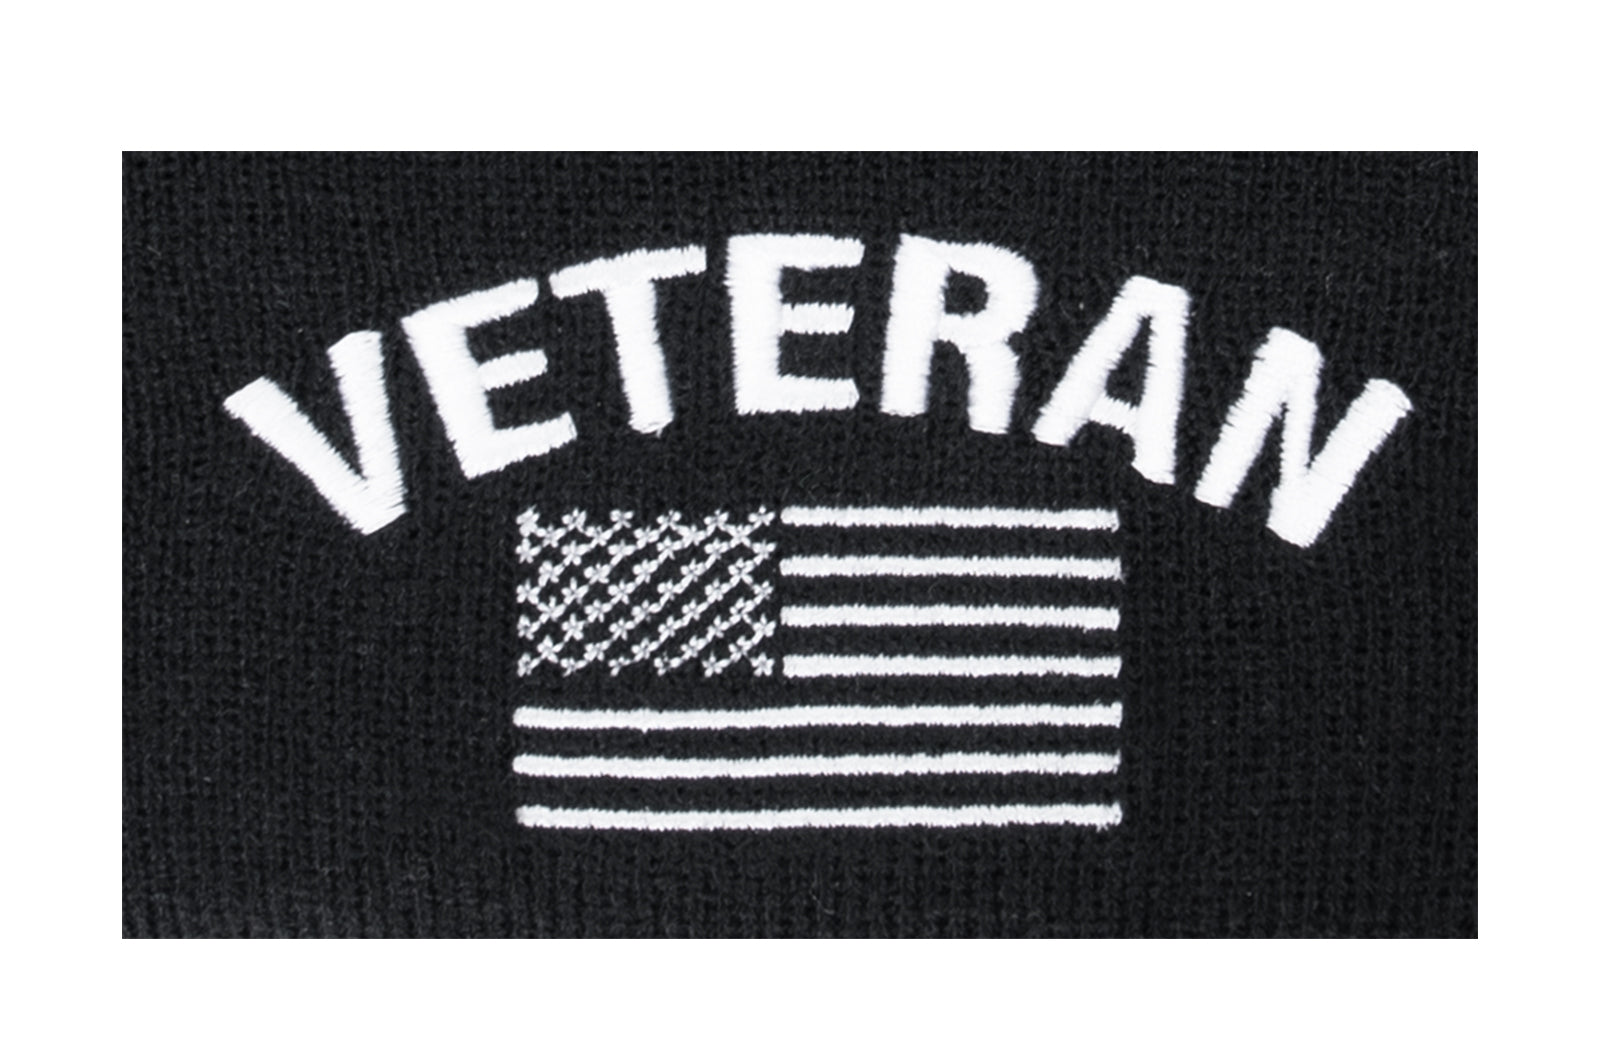 Rothco Veteran With US Flag Fine Knit Watch Cap